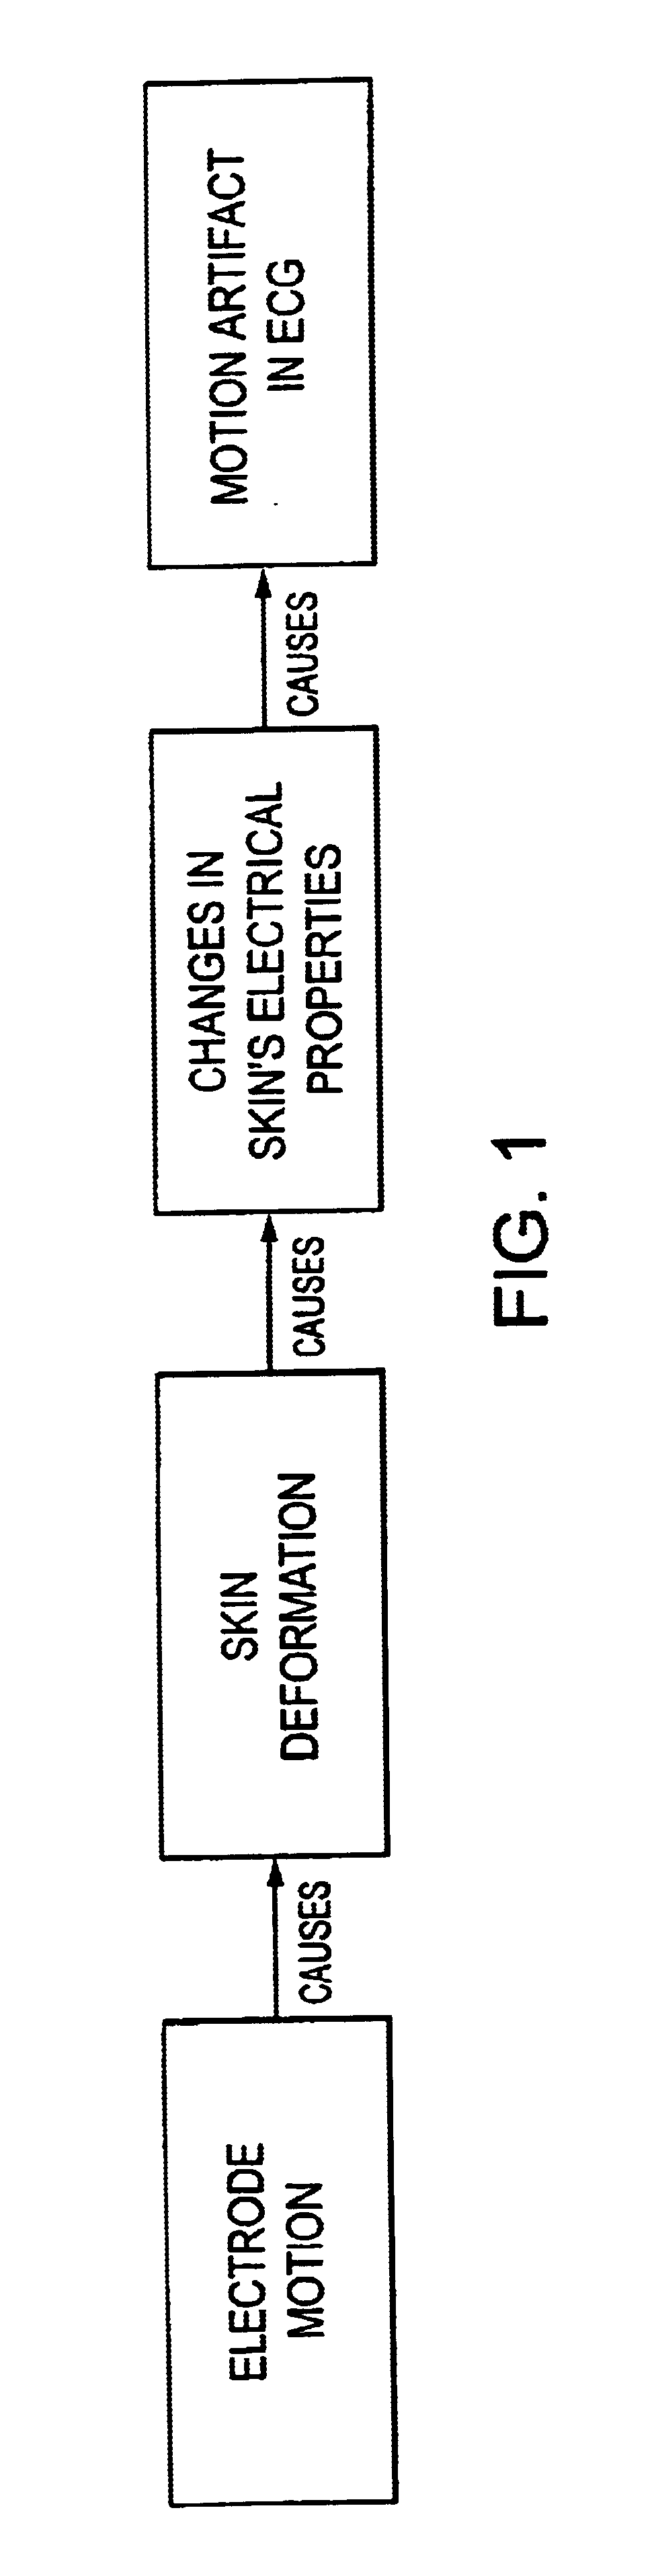 Electrode systems and methods for reducing motion artifact